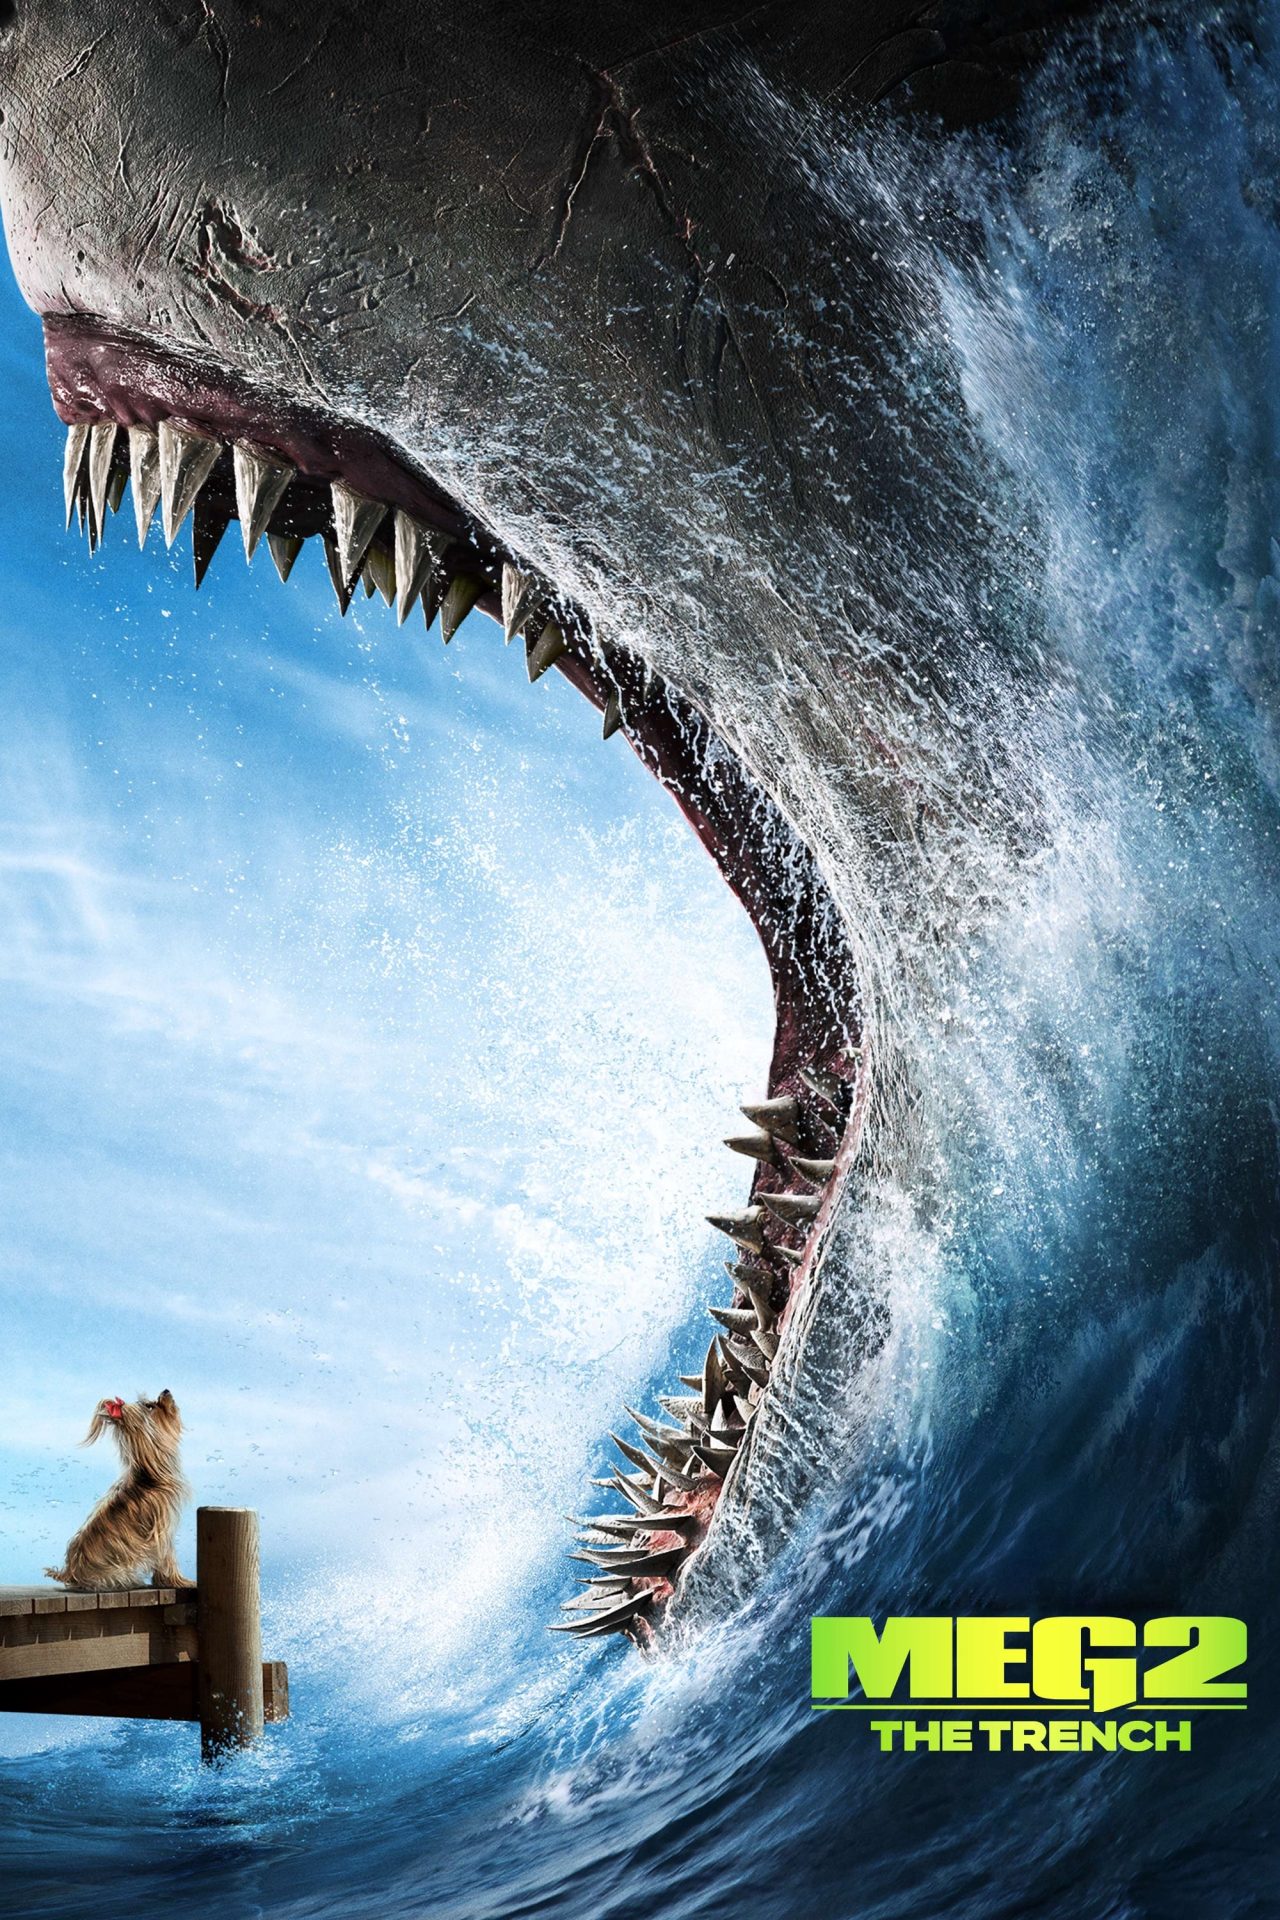 Poster for the movie "Meg 2: The Trench"